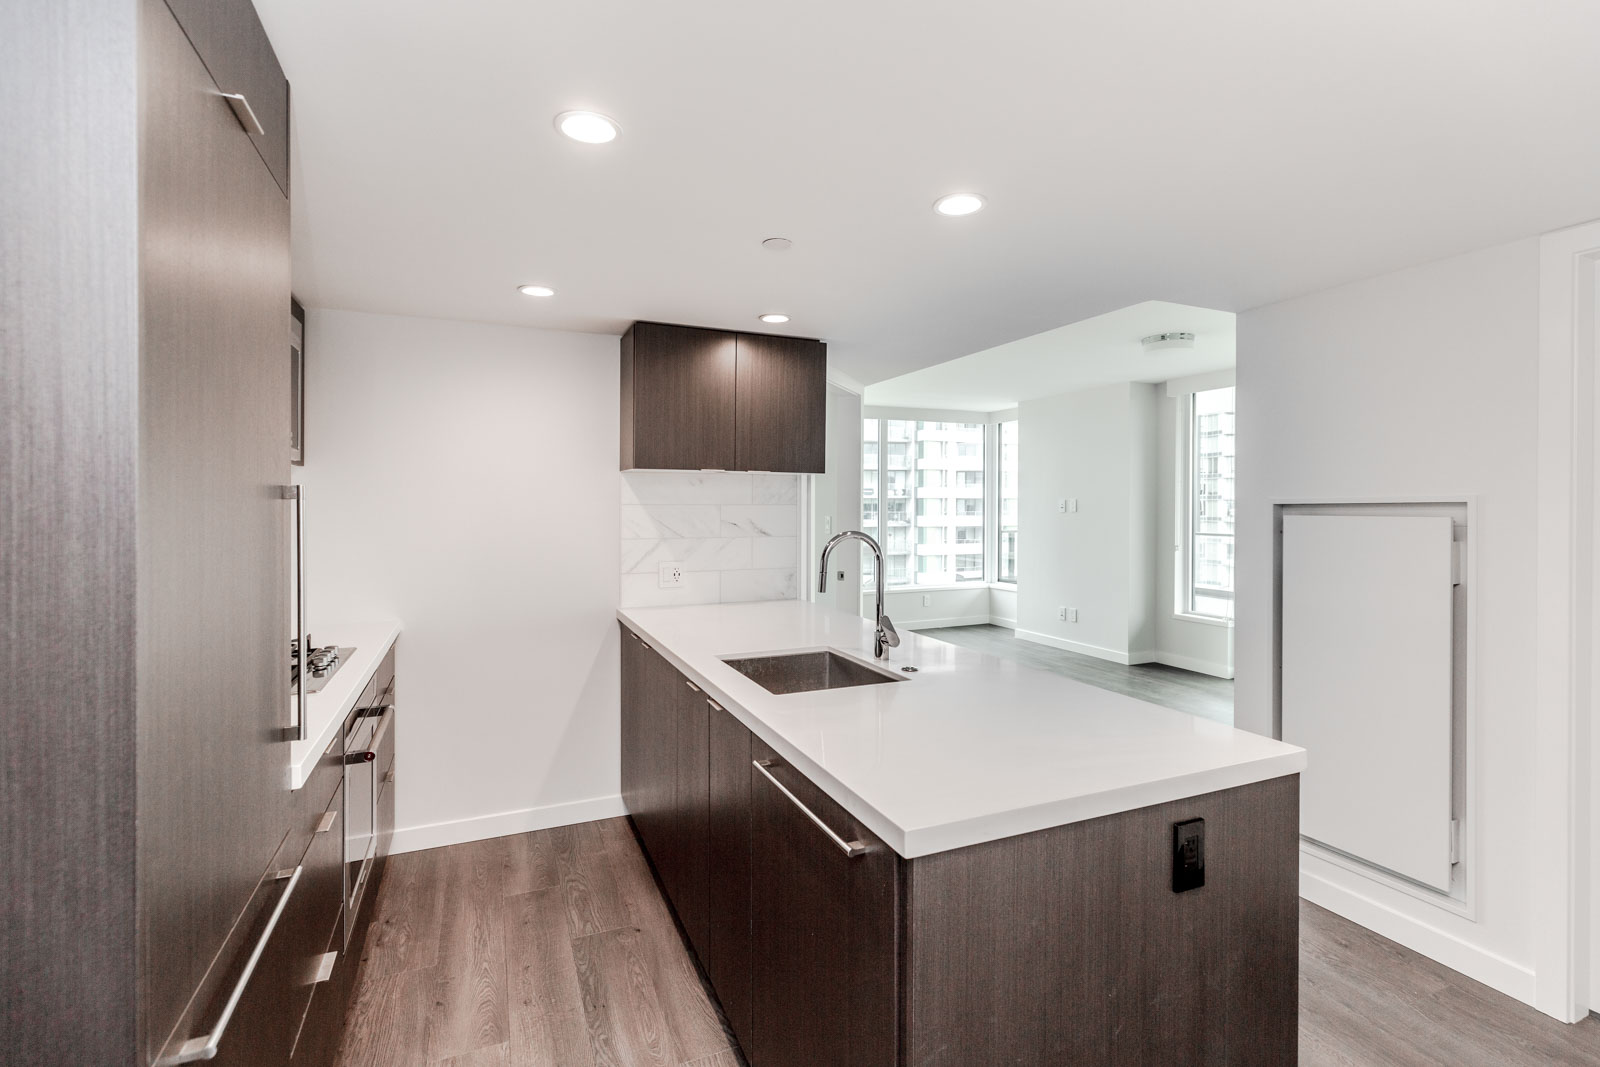 Downtown Vancouver luxury rental condo kitchen with stainless steel appliances.